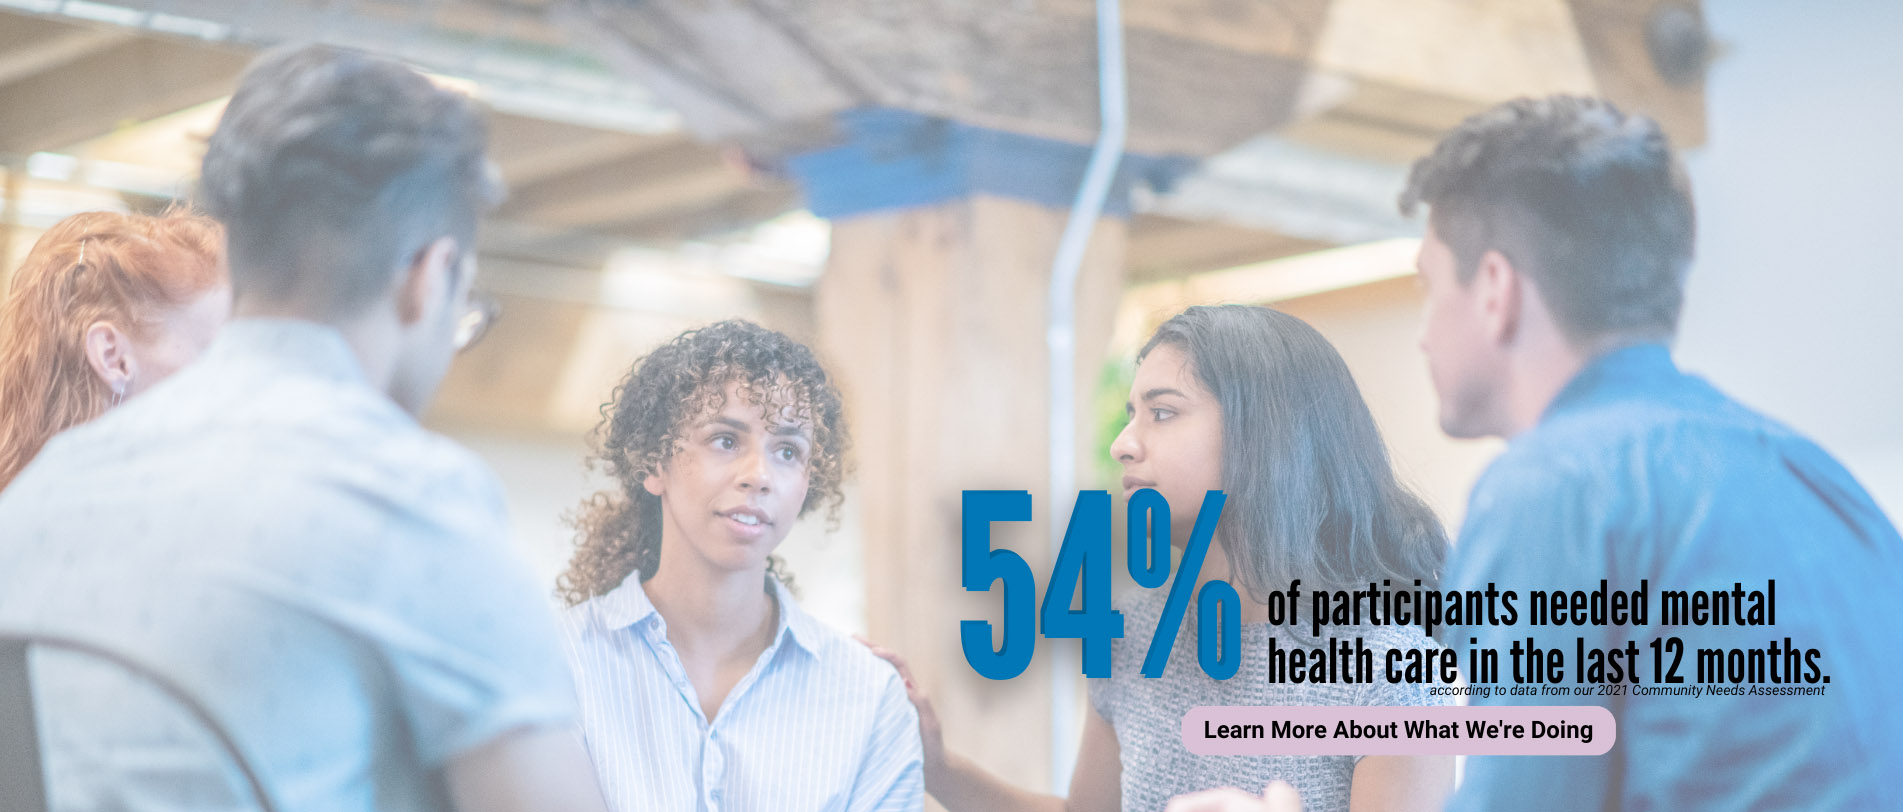 54% of participants needed mental health care in the last 12 months